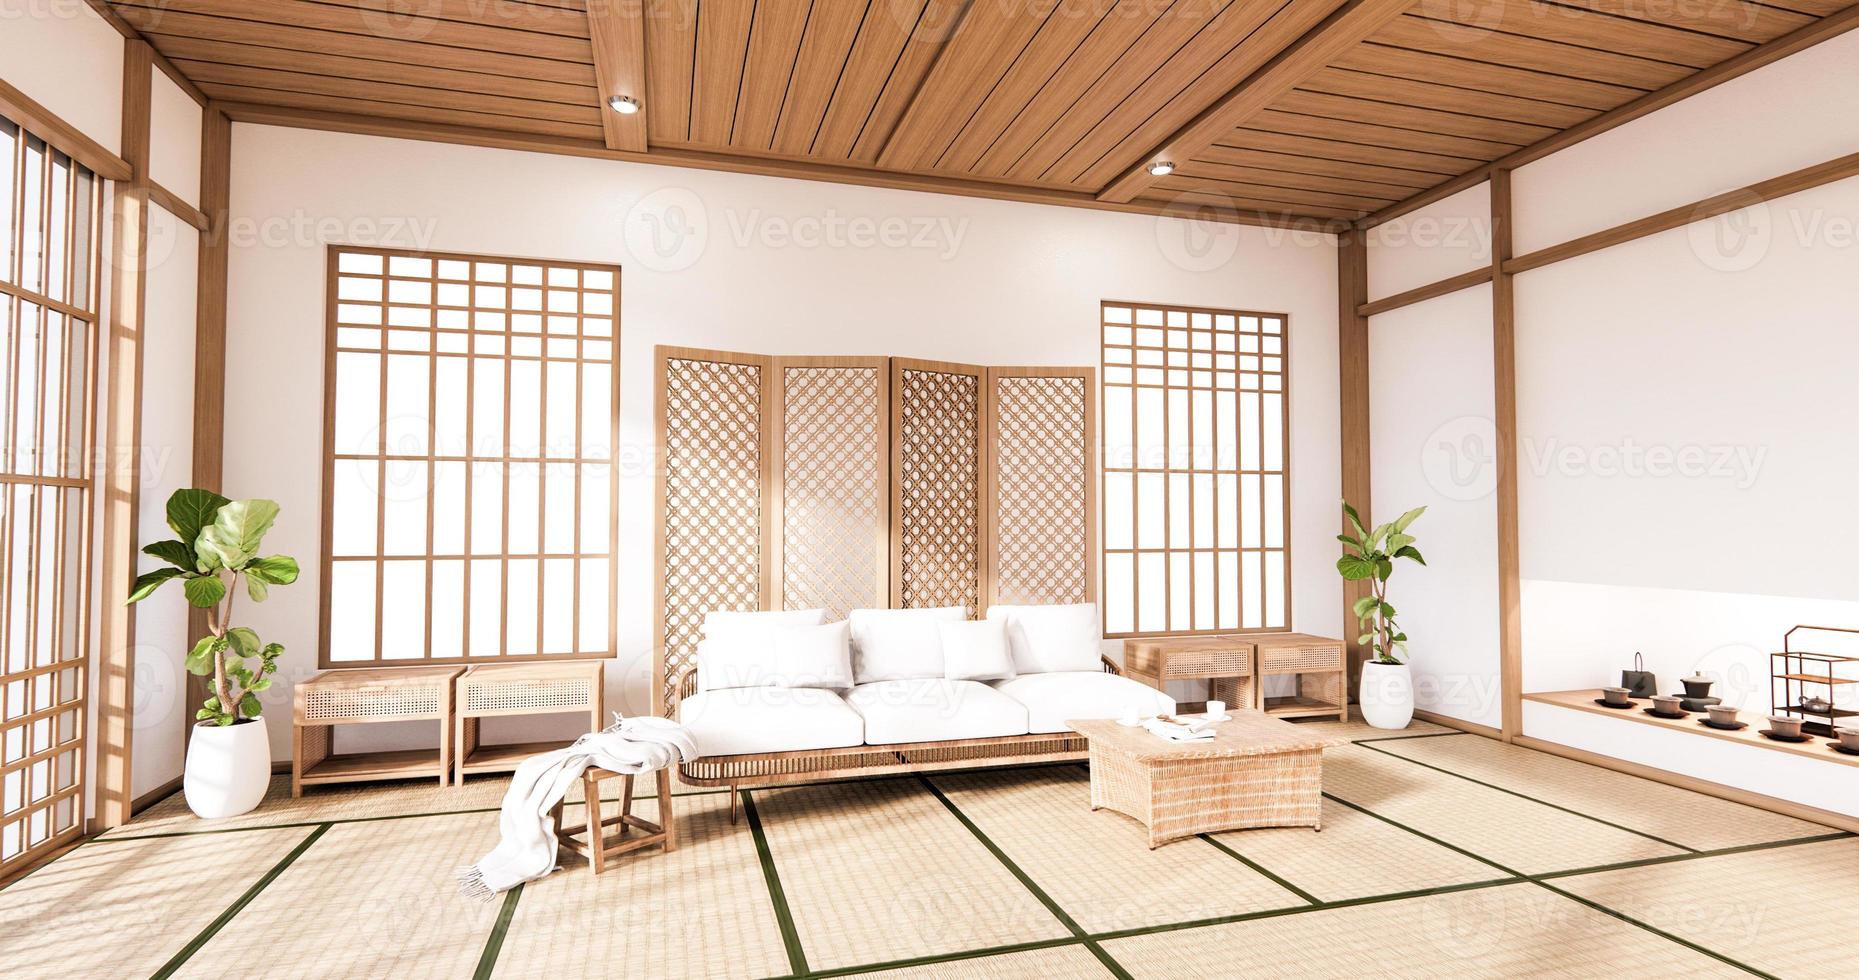 Sofa and partition japanese on room tropical interior with tatami mat floor and white wall.3D rendering photo